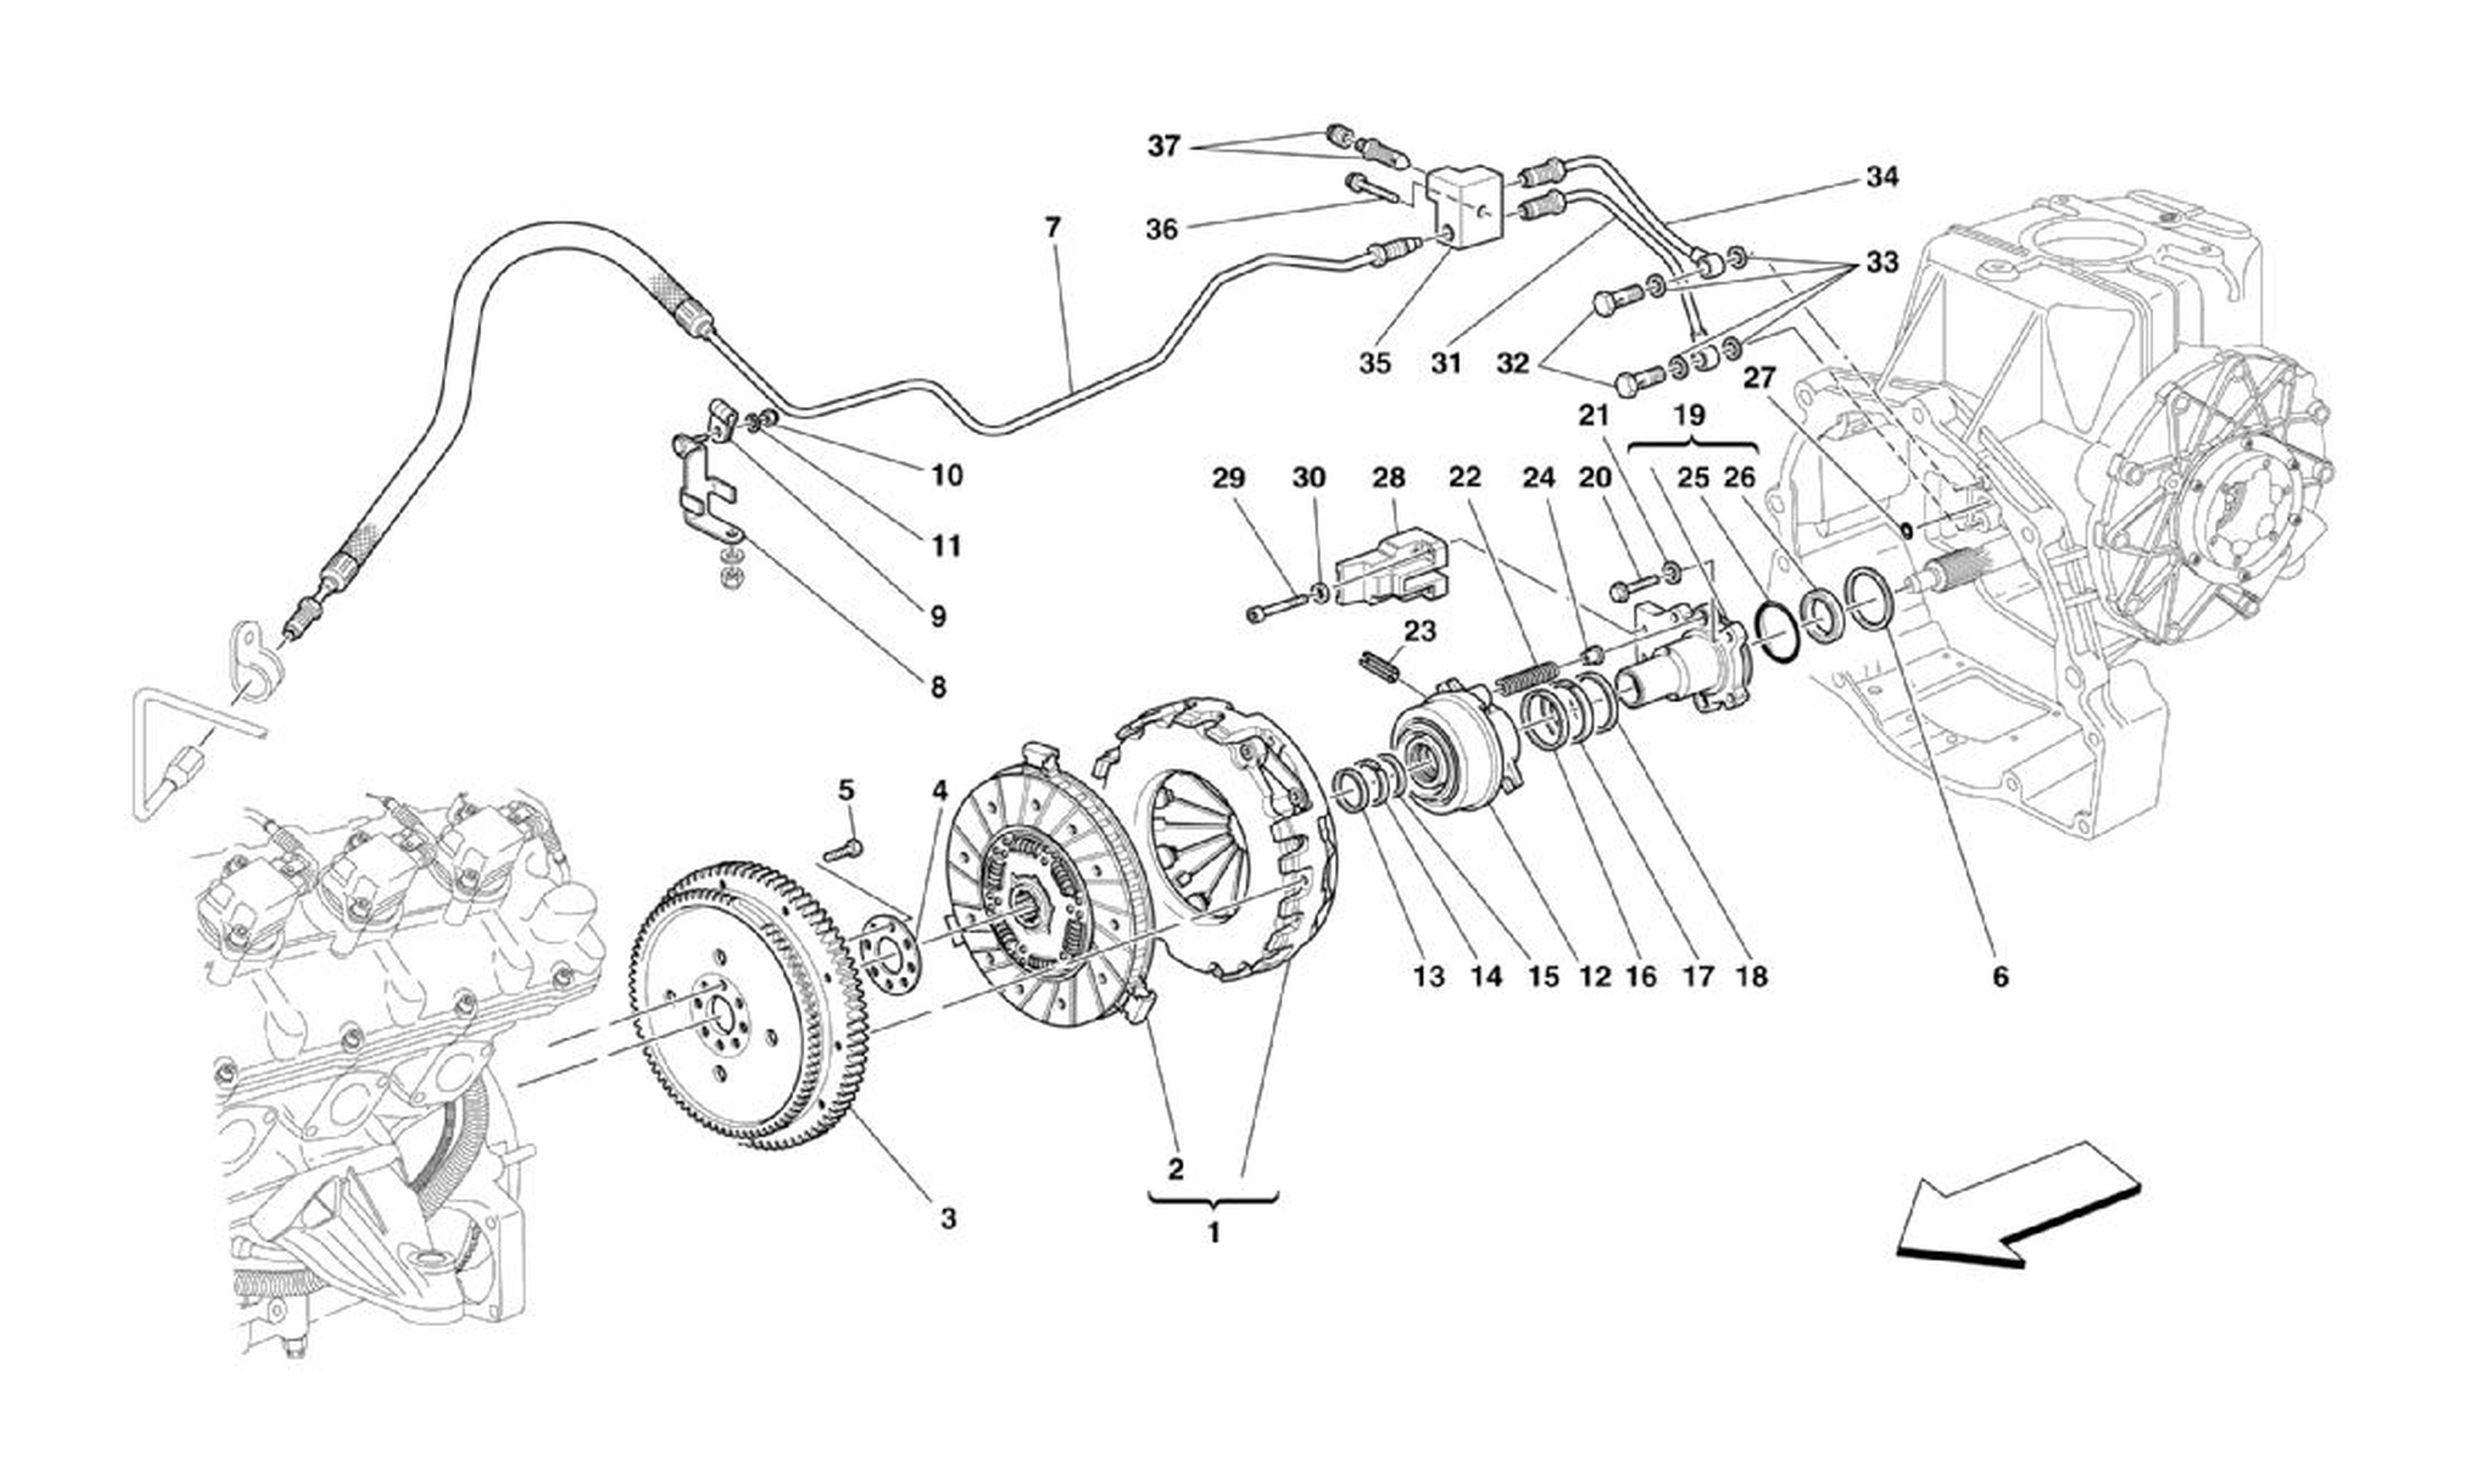 Schematic: Clutch And Controls -Not For F1-